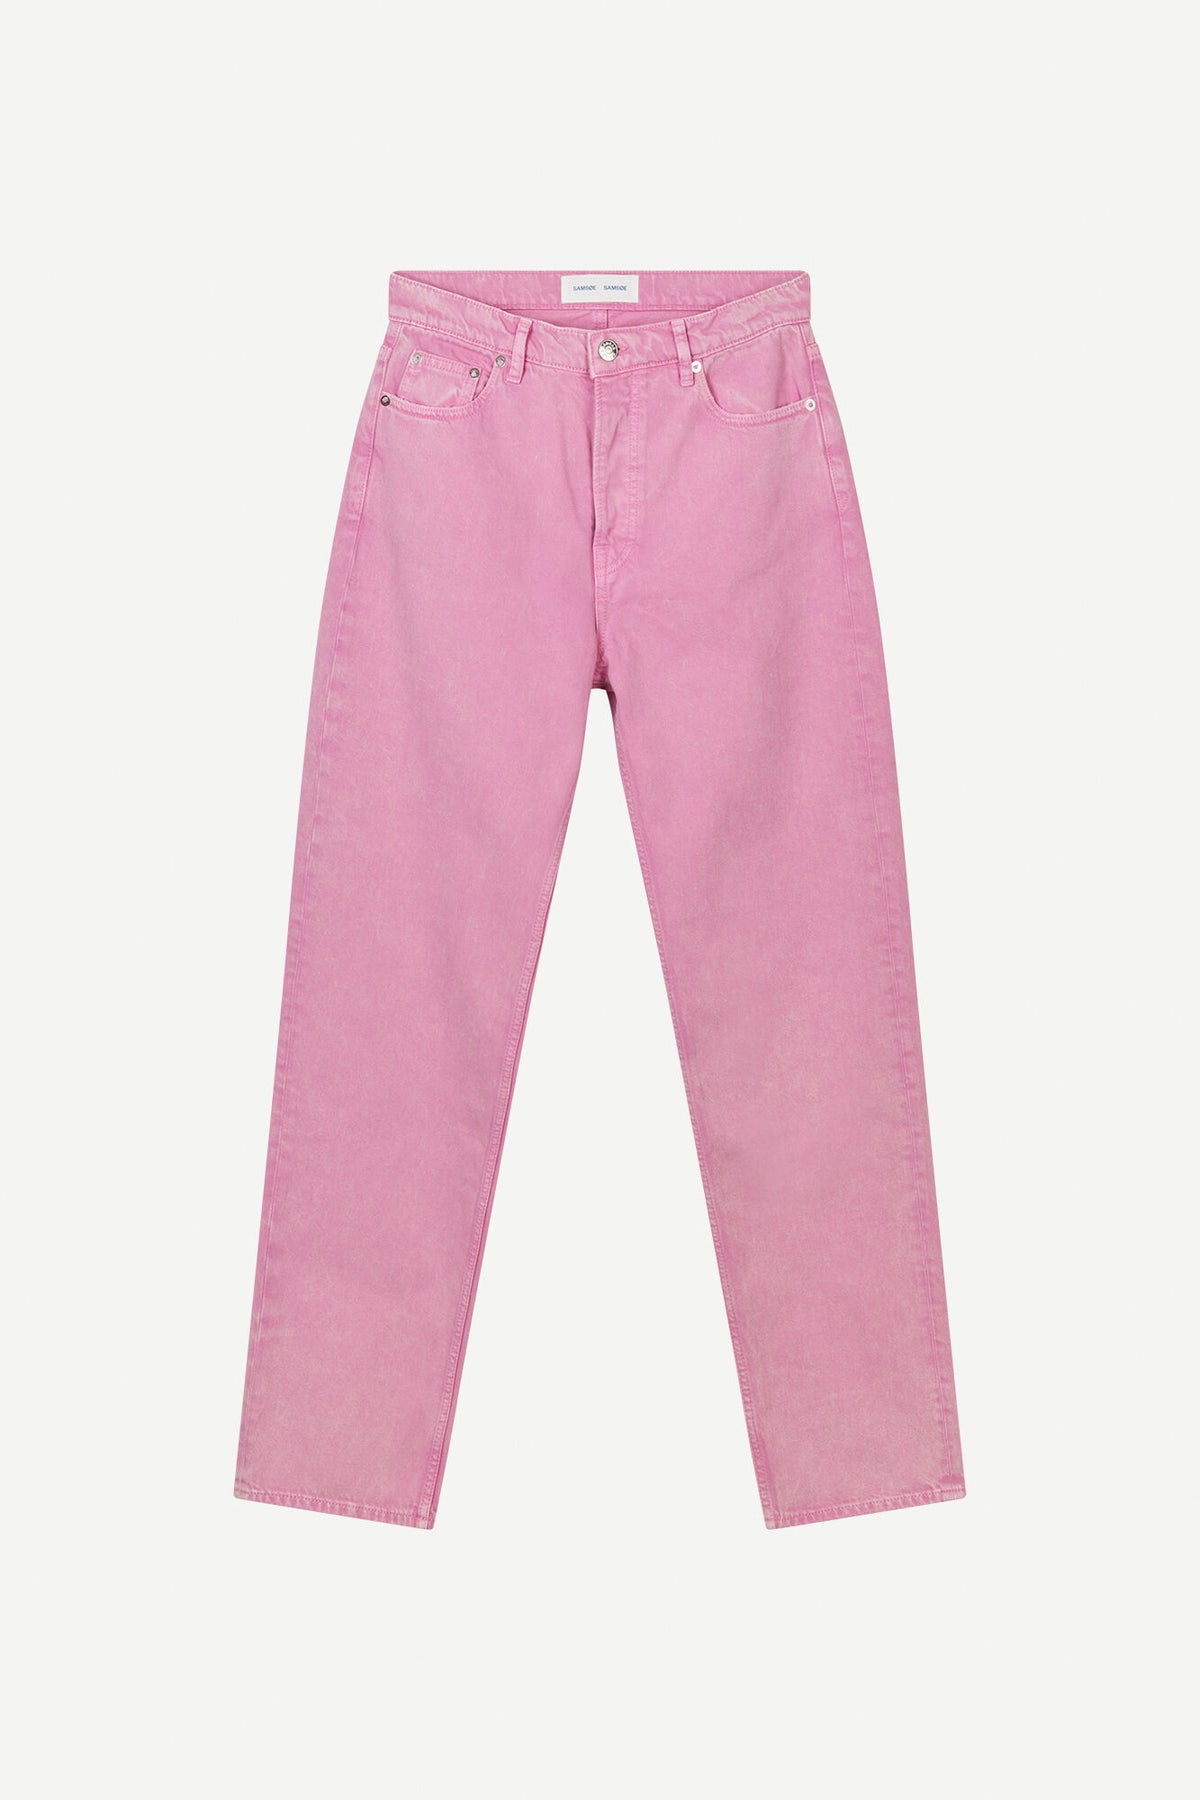 pink button fly jeans with a straight leg